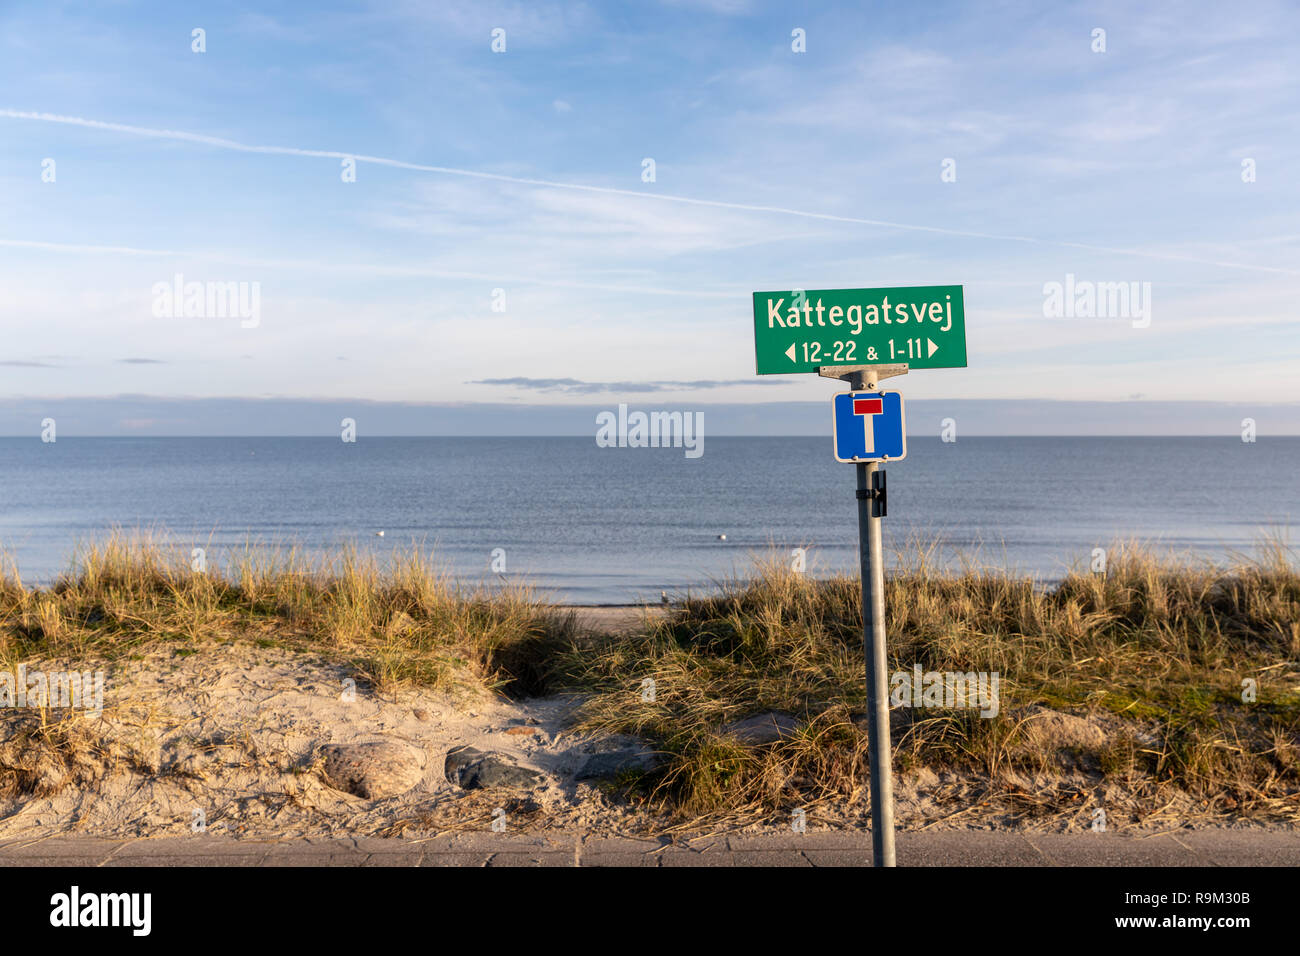 Kattegatsvej, street name sign by the beach, with the sea (Kattegat) in the background; Saeby, Denmark Stock Photo